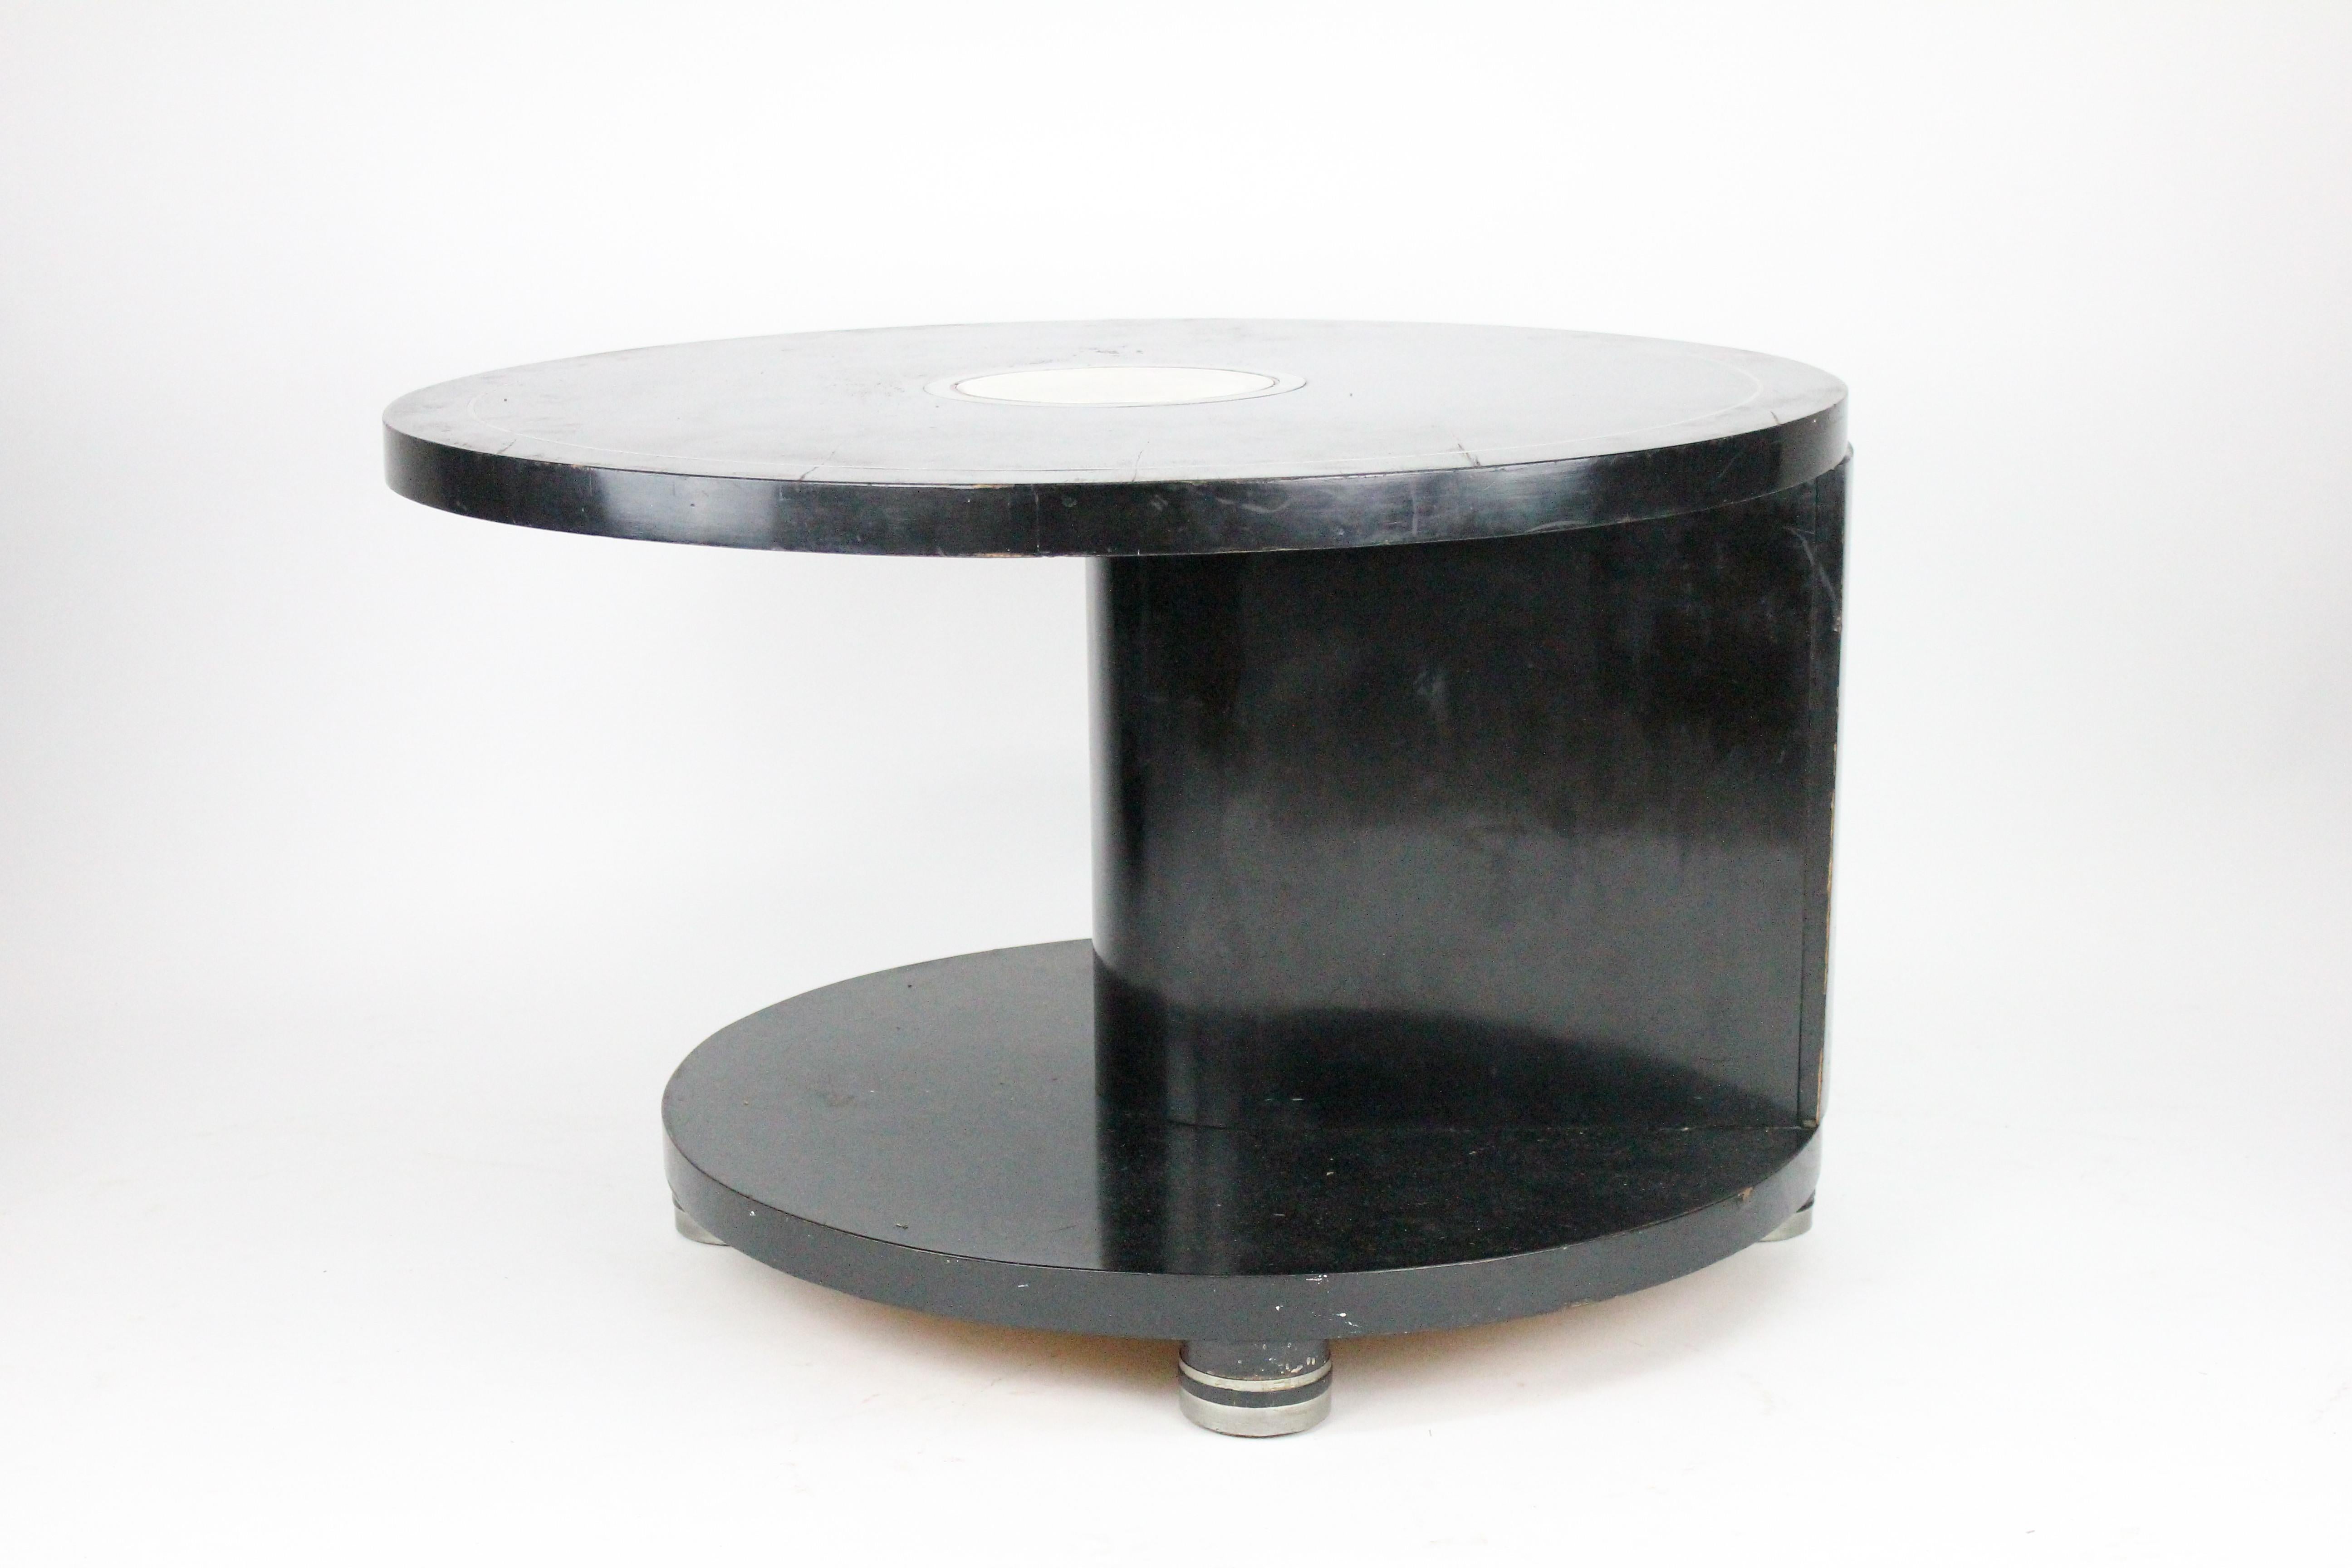 Alvar Andersson Table, 1933, Swedish, Black Painted with Pewter Inlays 10